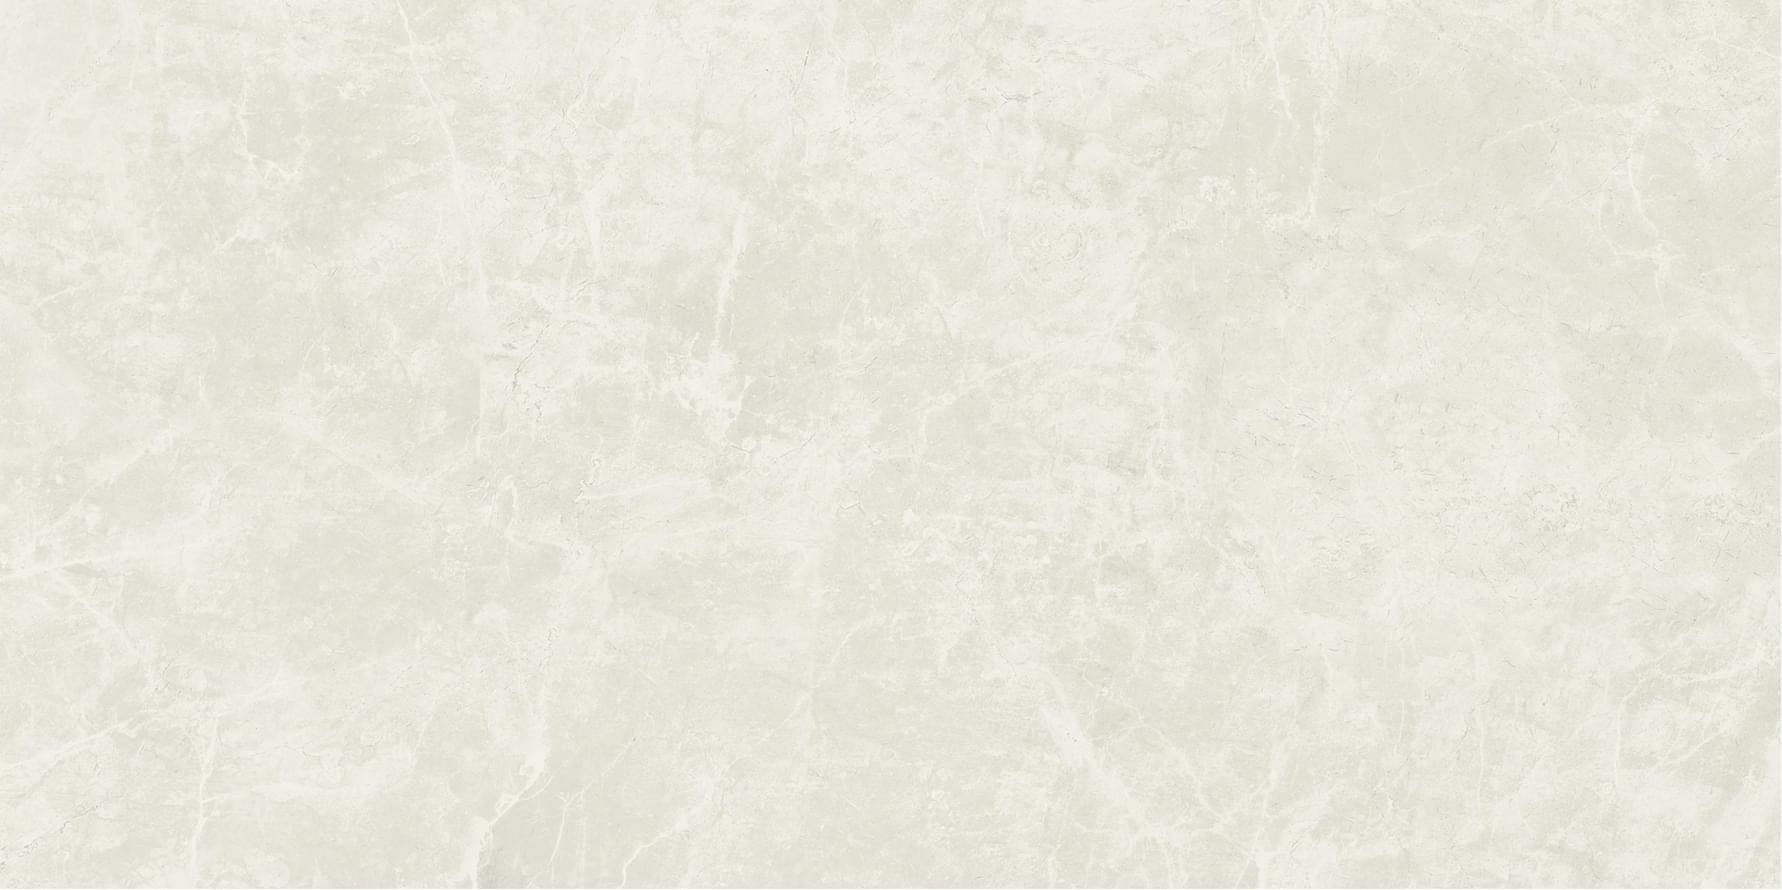 Magica Marstood Marble 04 Pulpis Beige Polished Rectified 60x120